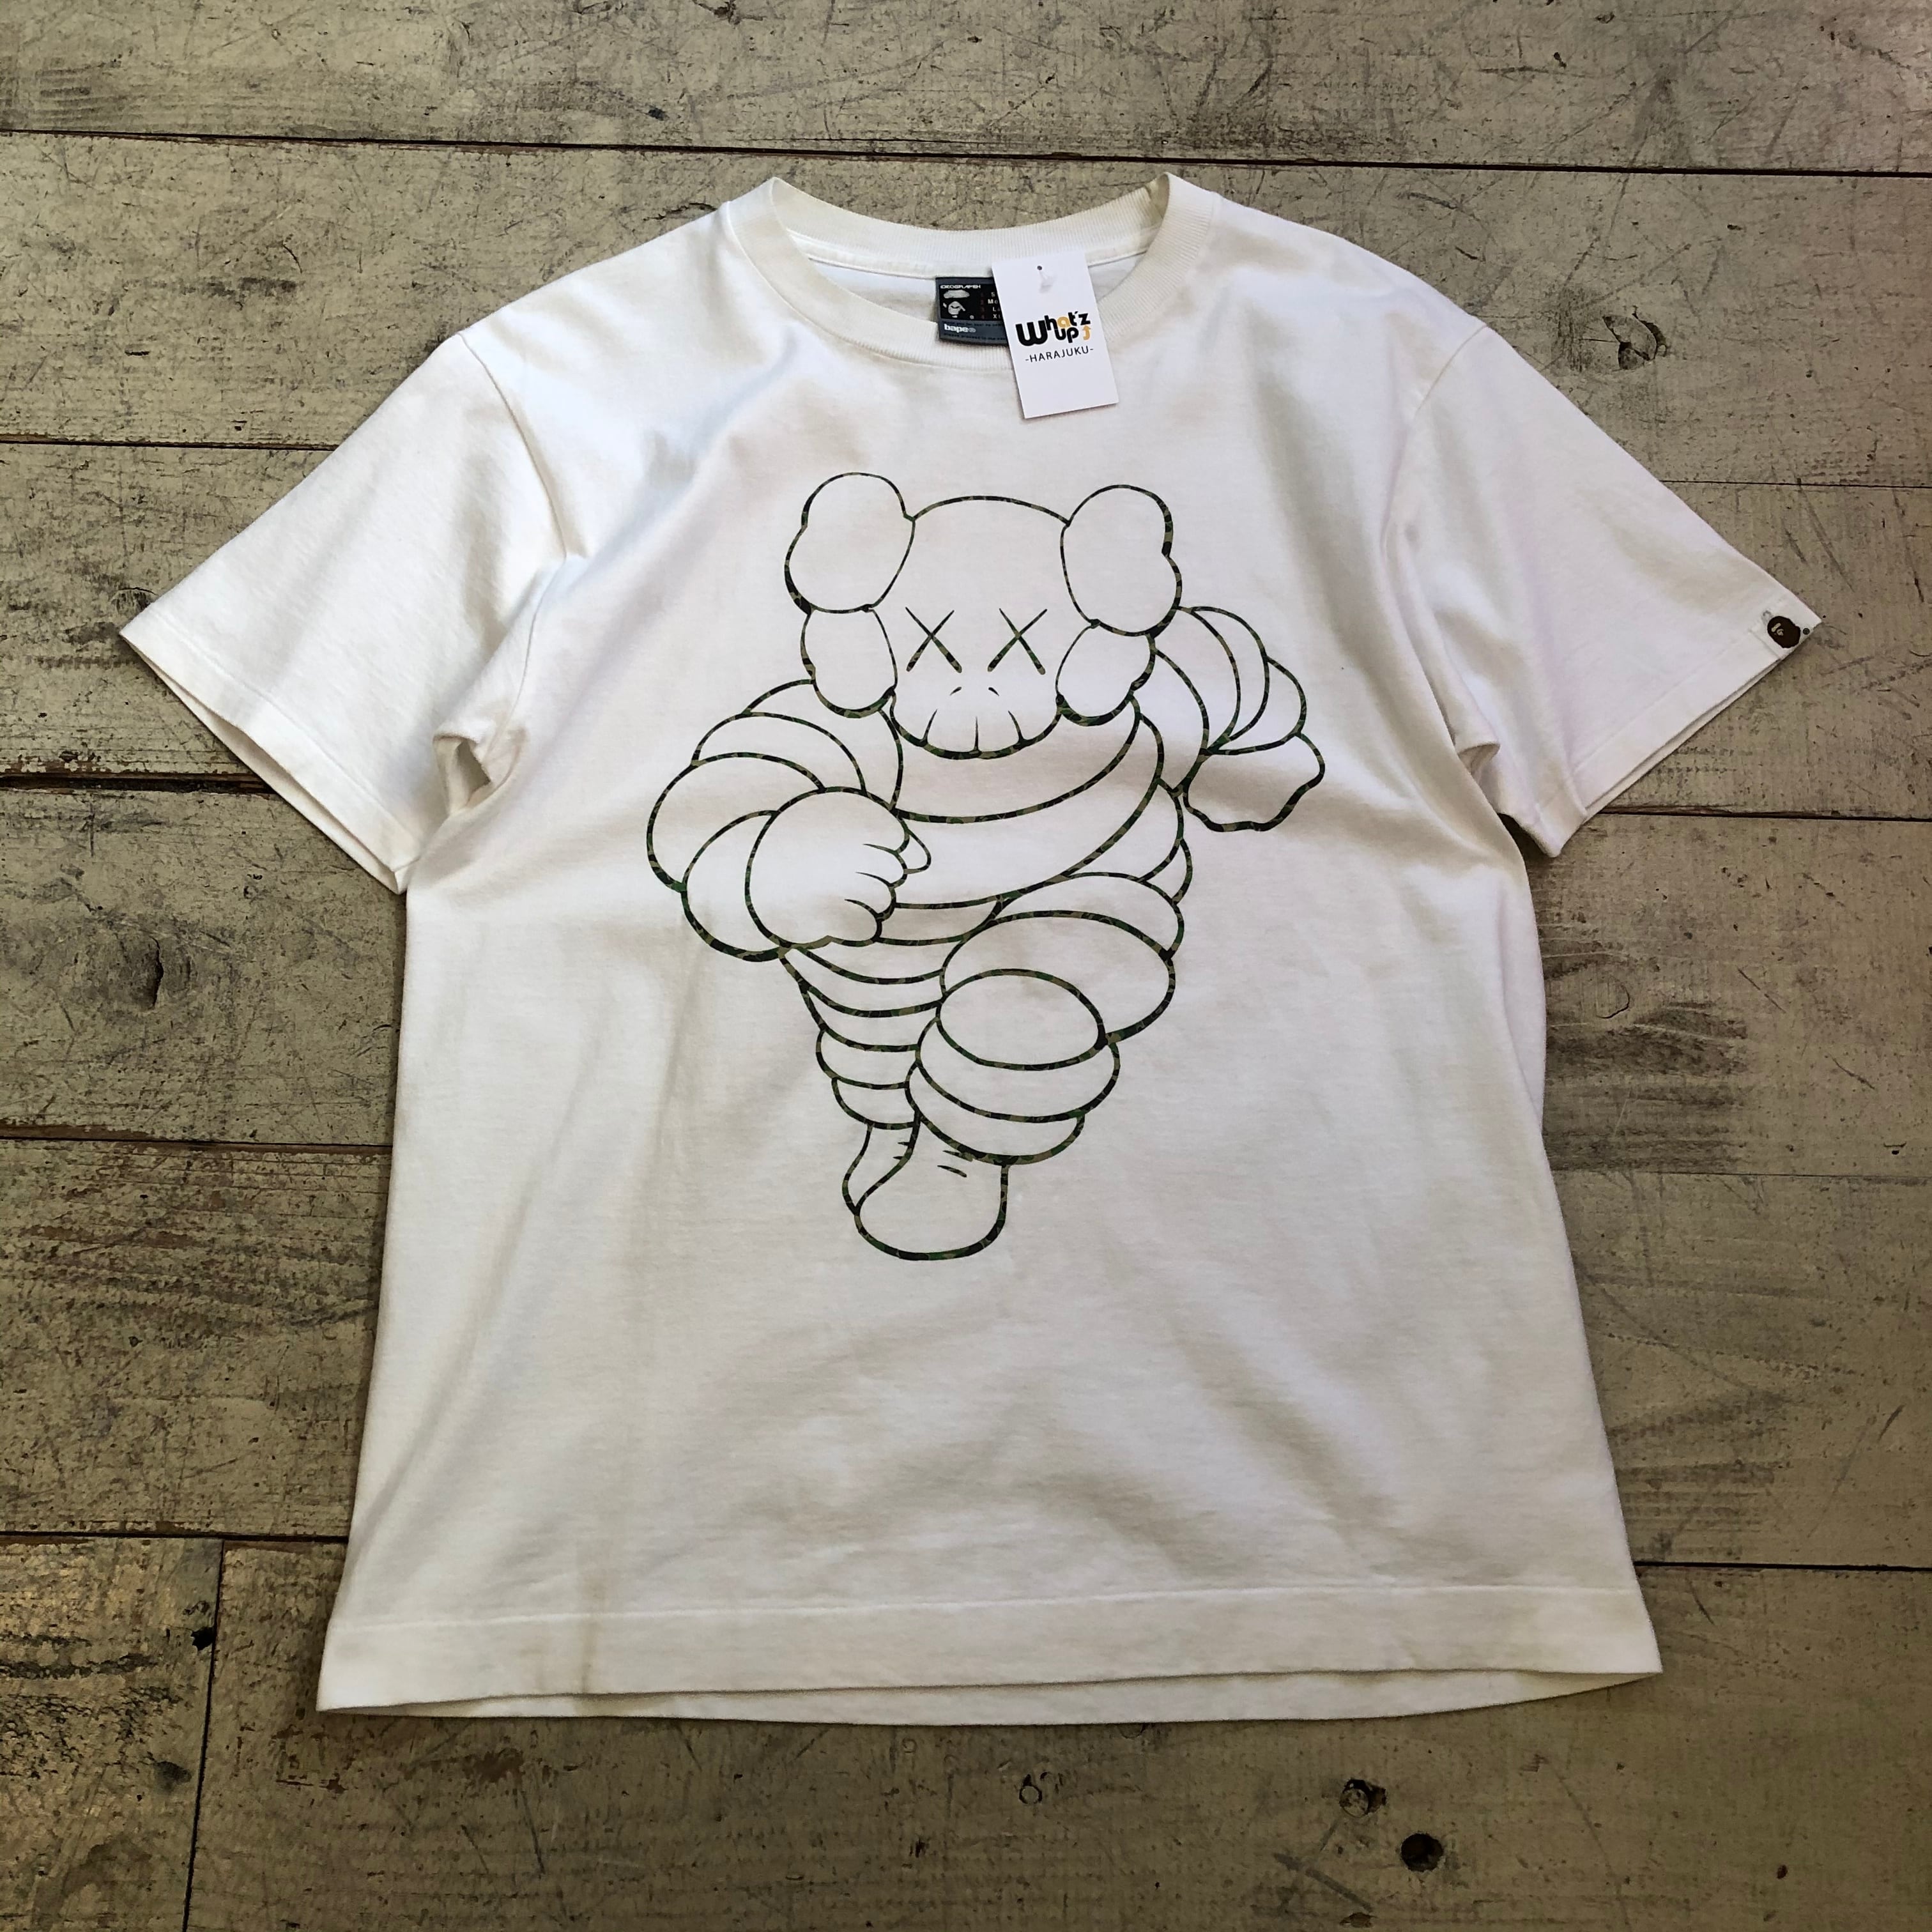 2000s A BATHING APE × KAWS T-shirt | What’z up powered by BASE